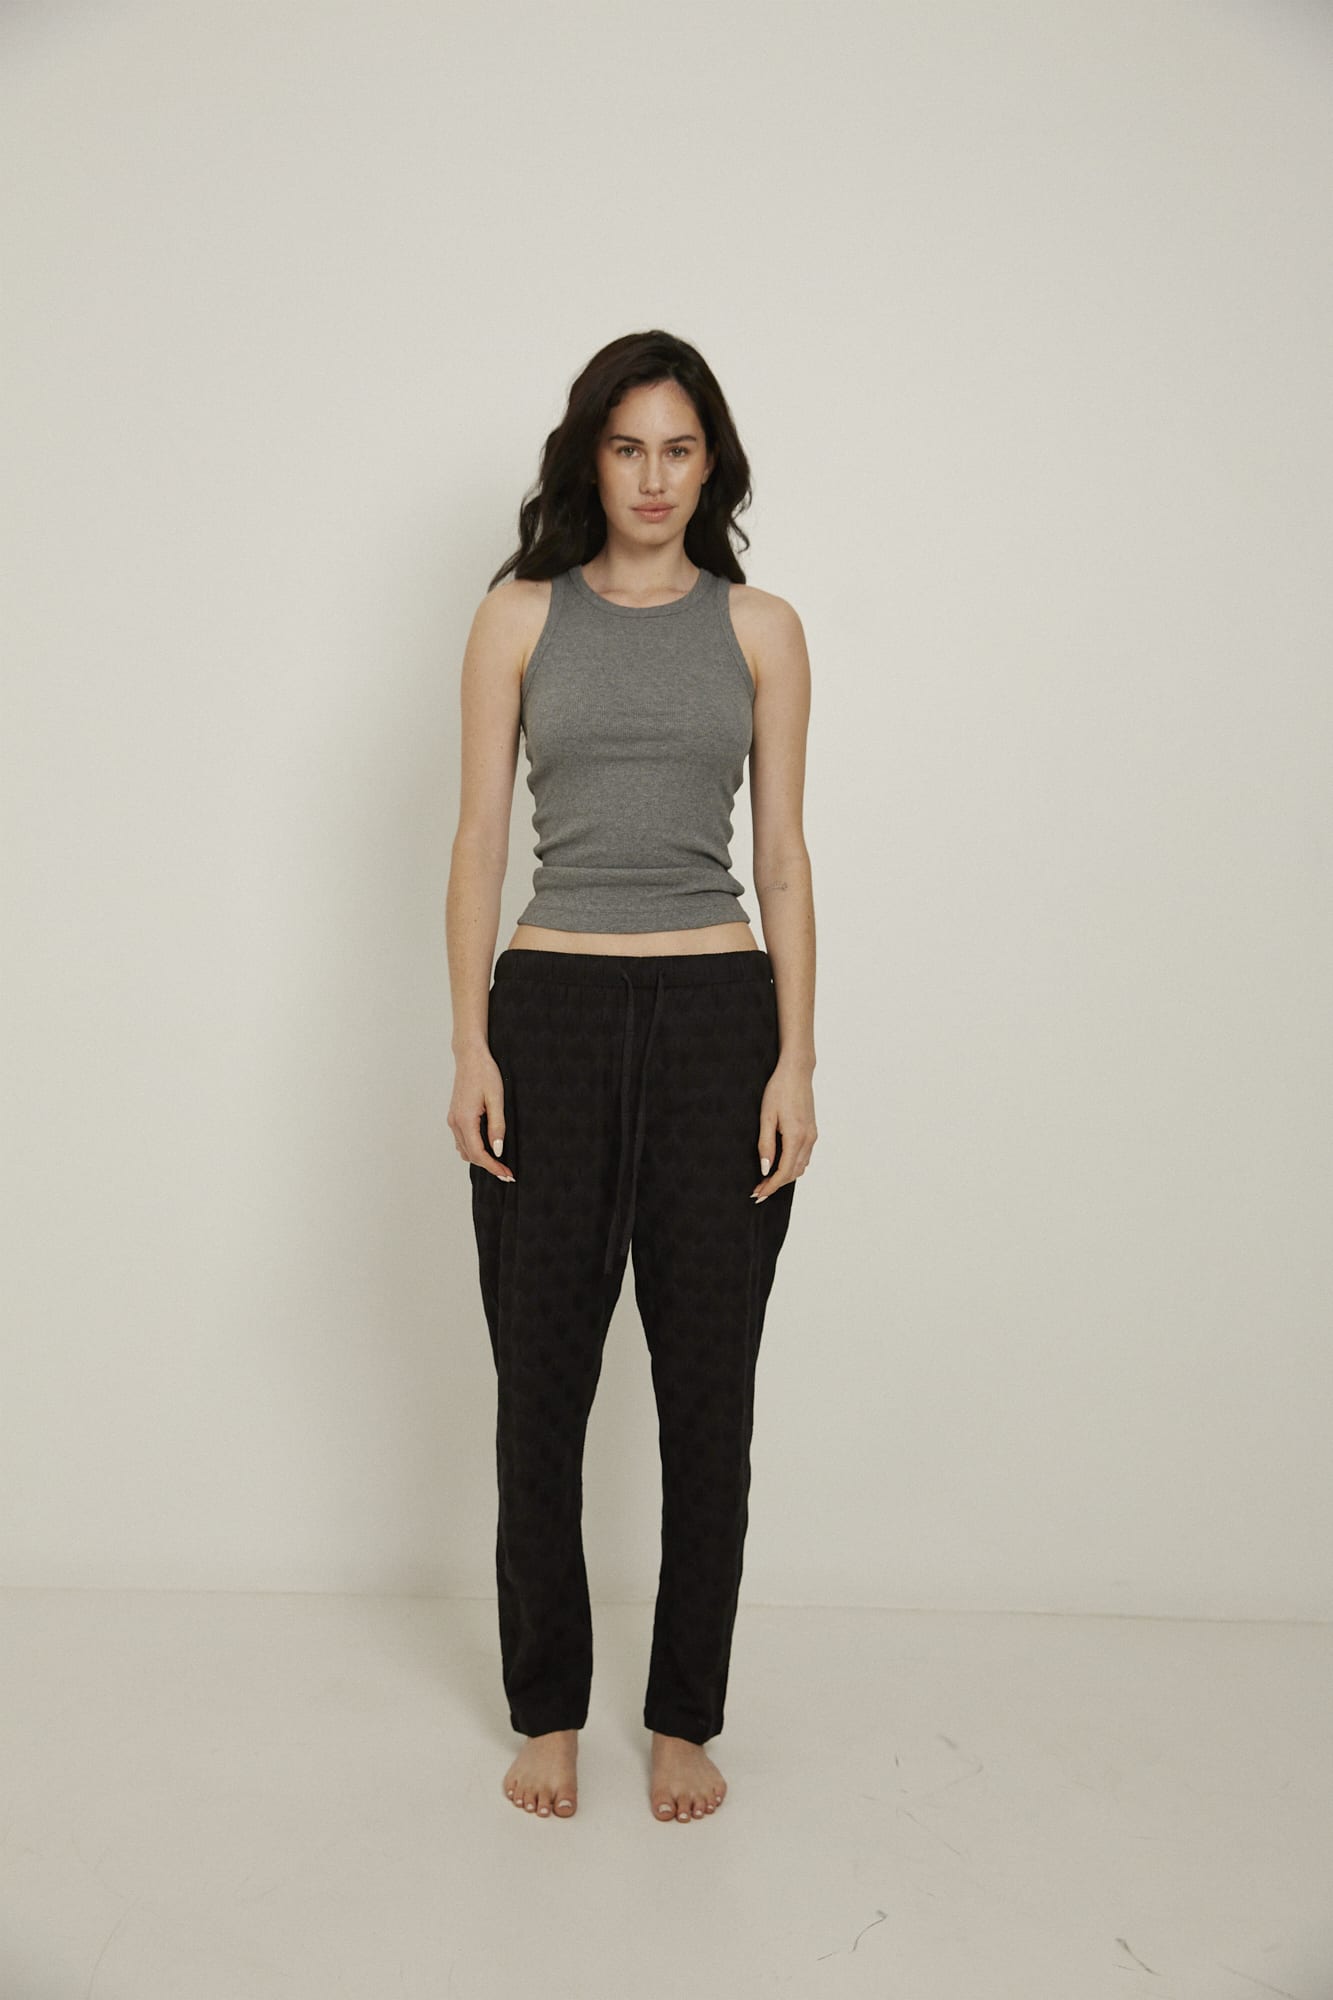 Women’s pyjama pant.  Made from 100% organic cotton, in black colour featuring delicate all over embroidery. These pants feature an elasticated waistband with a drawstring for comfort.